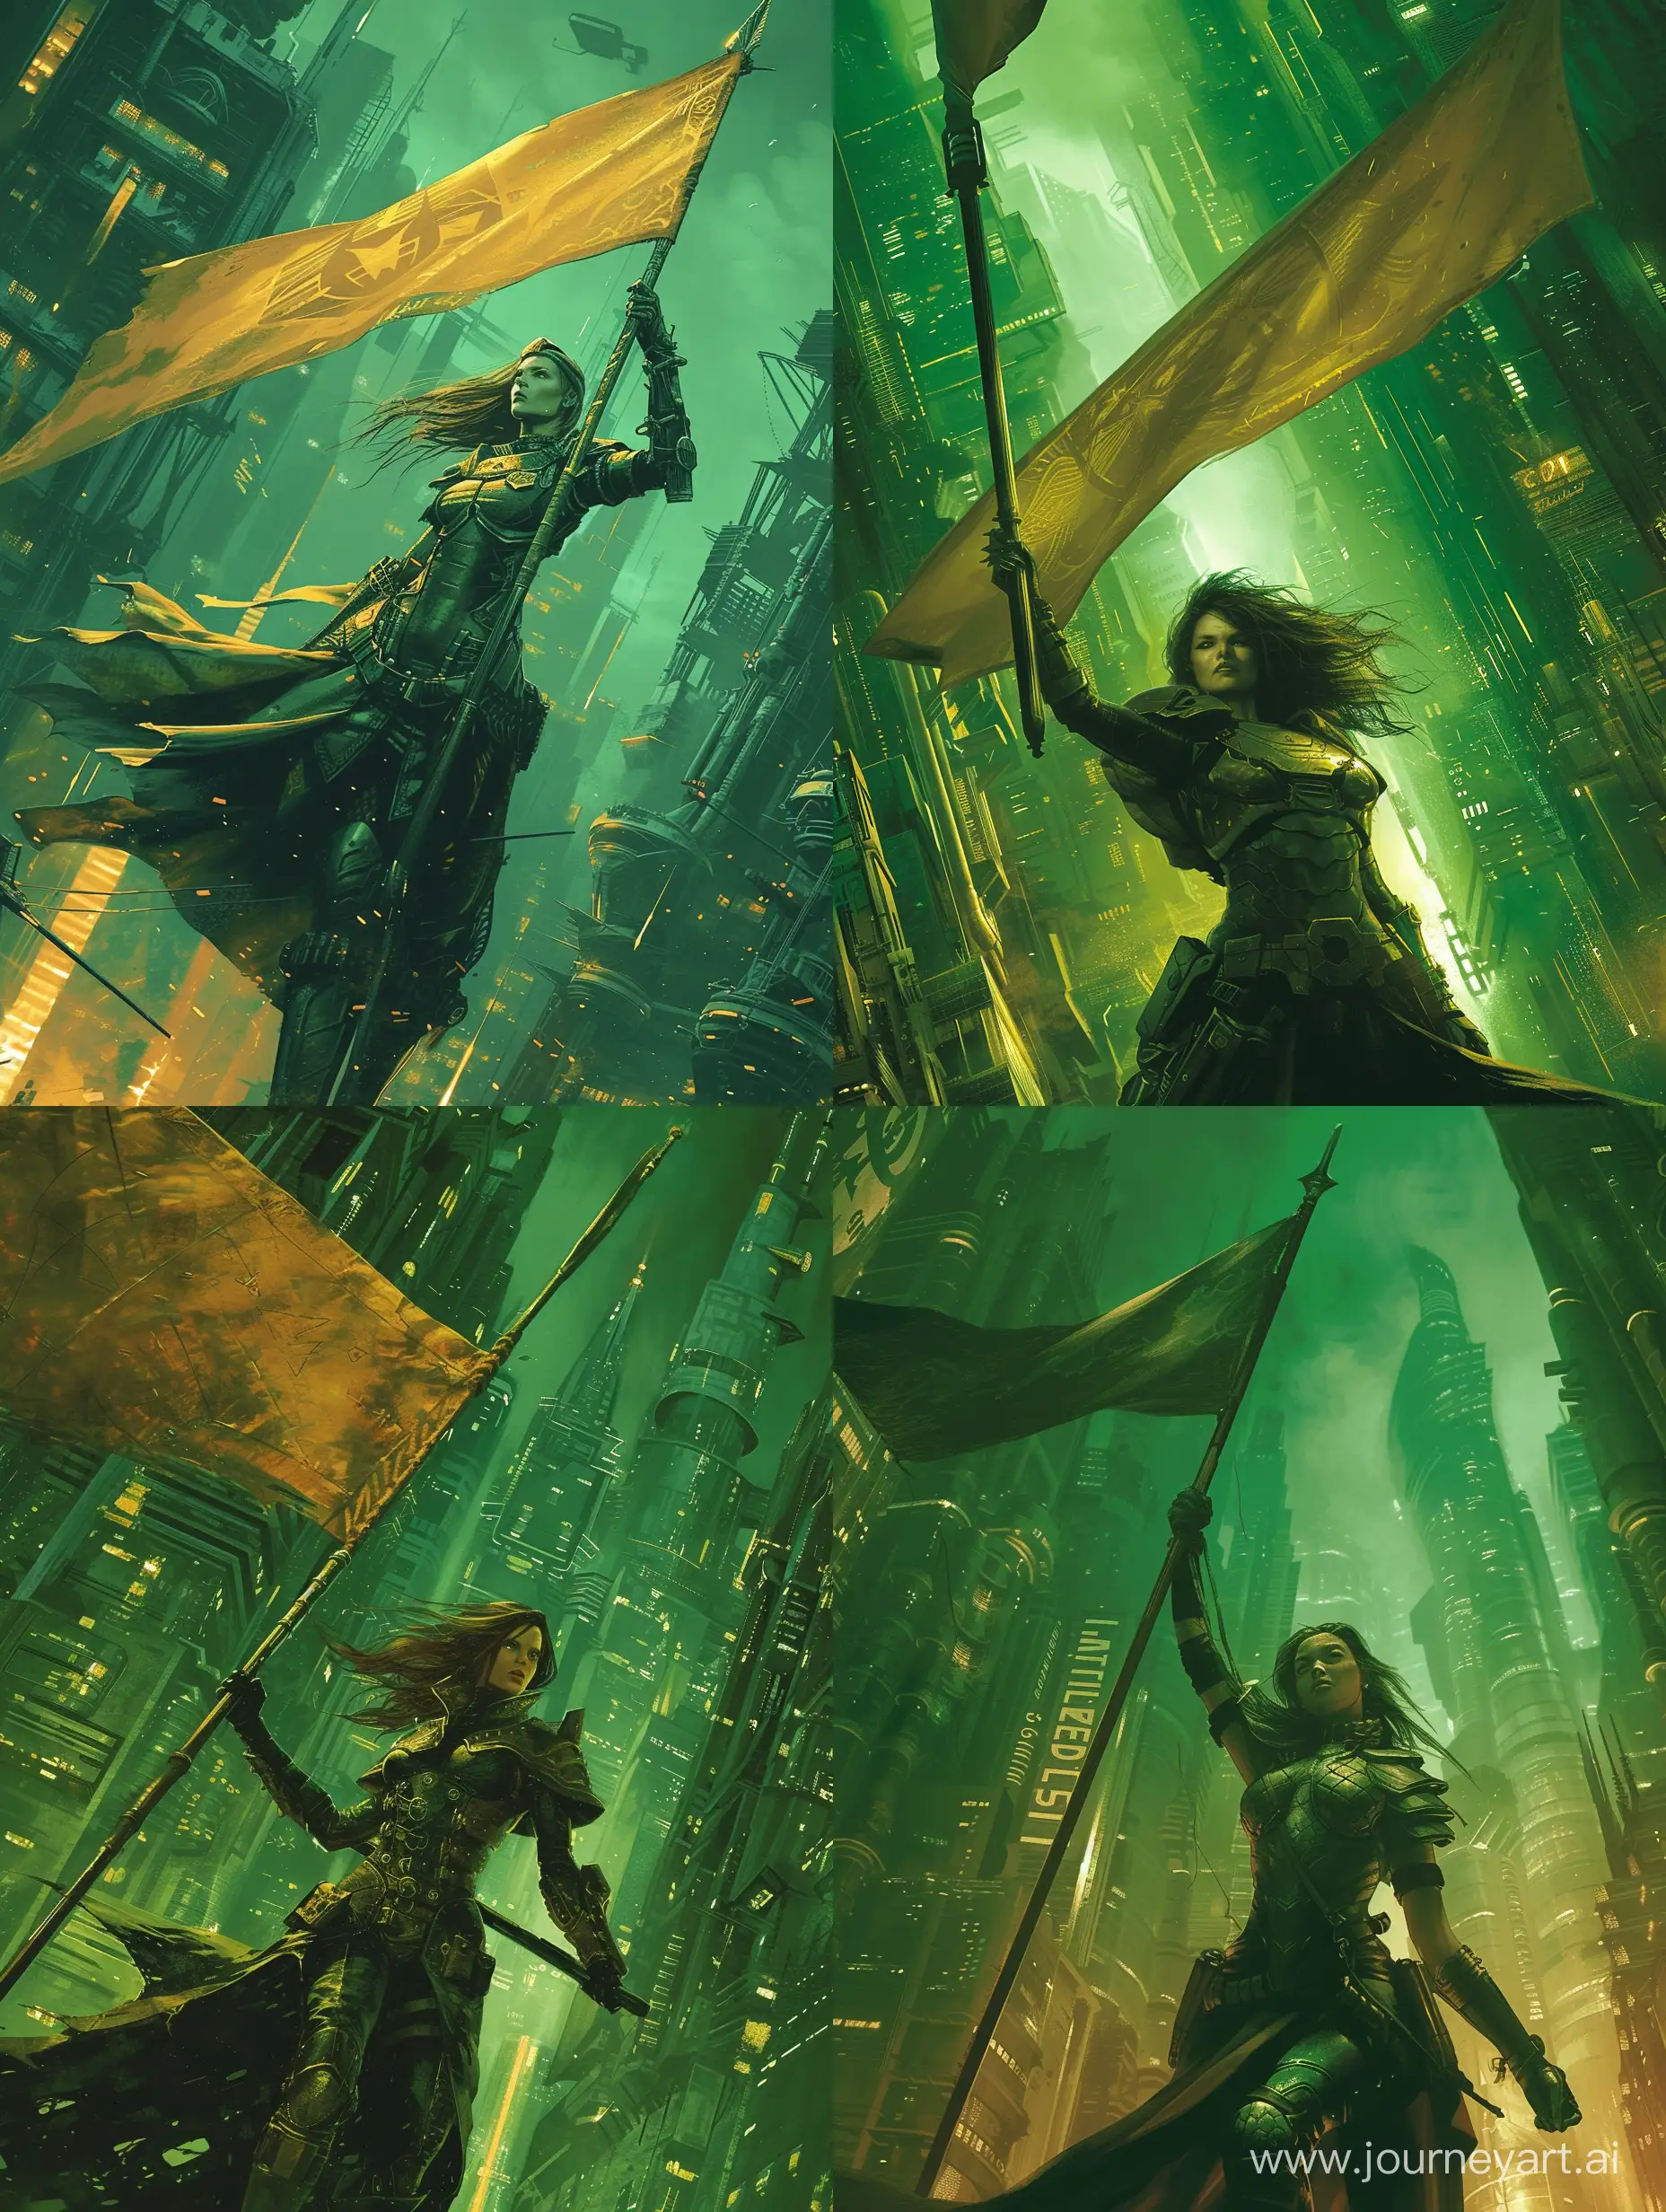 Futuristic-CosmoStyle-Female-Warrior-with-Banner-in-Dark-Green-and-Amber